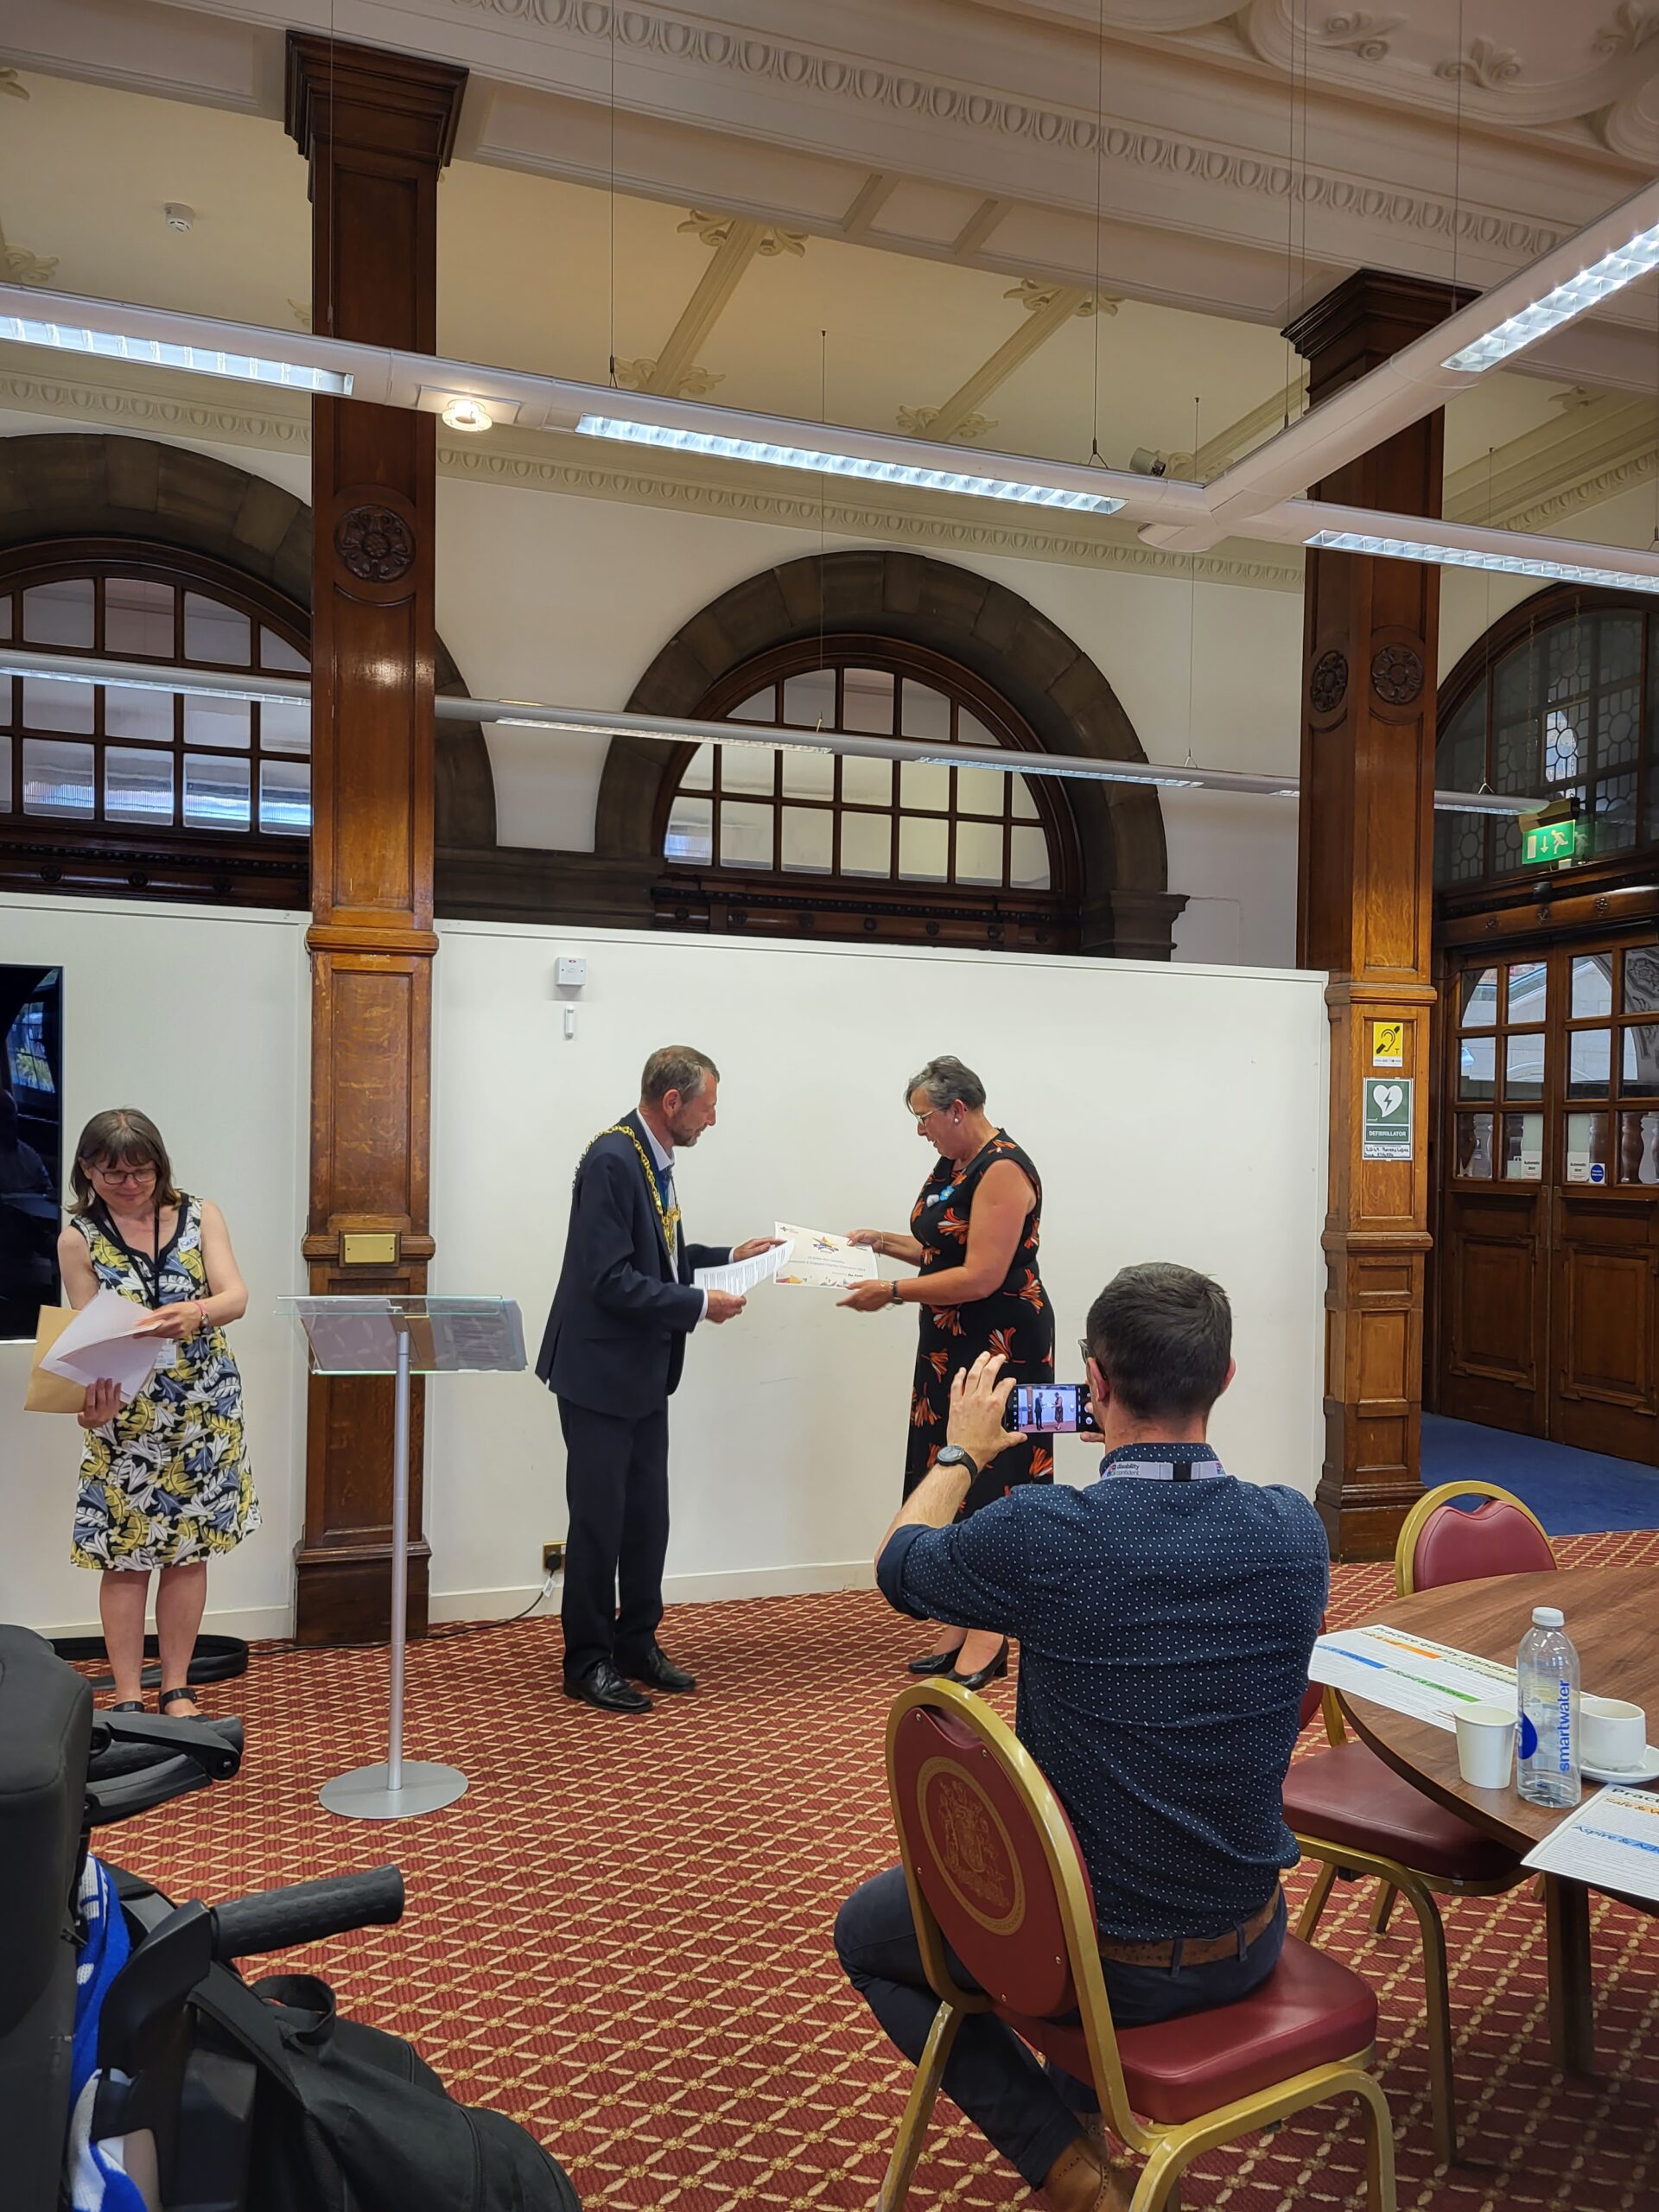 woman standing and receiving an award certificate from the Lord Mayor of Sheffield